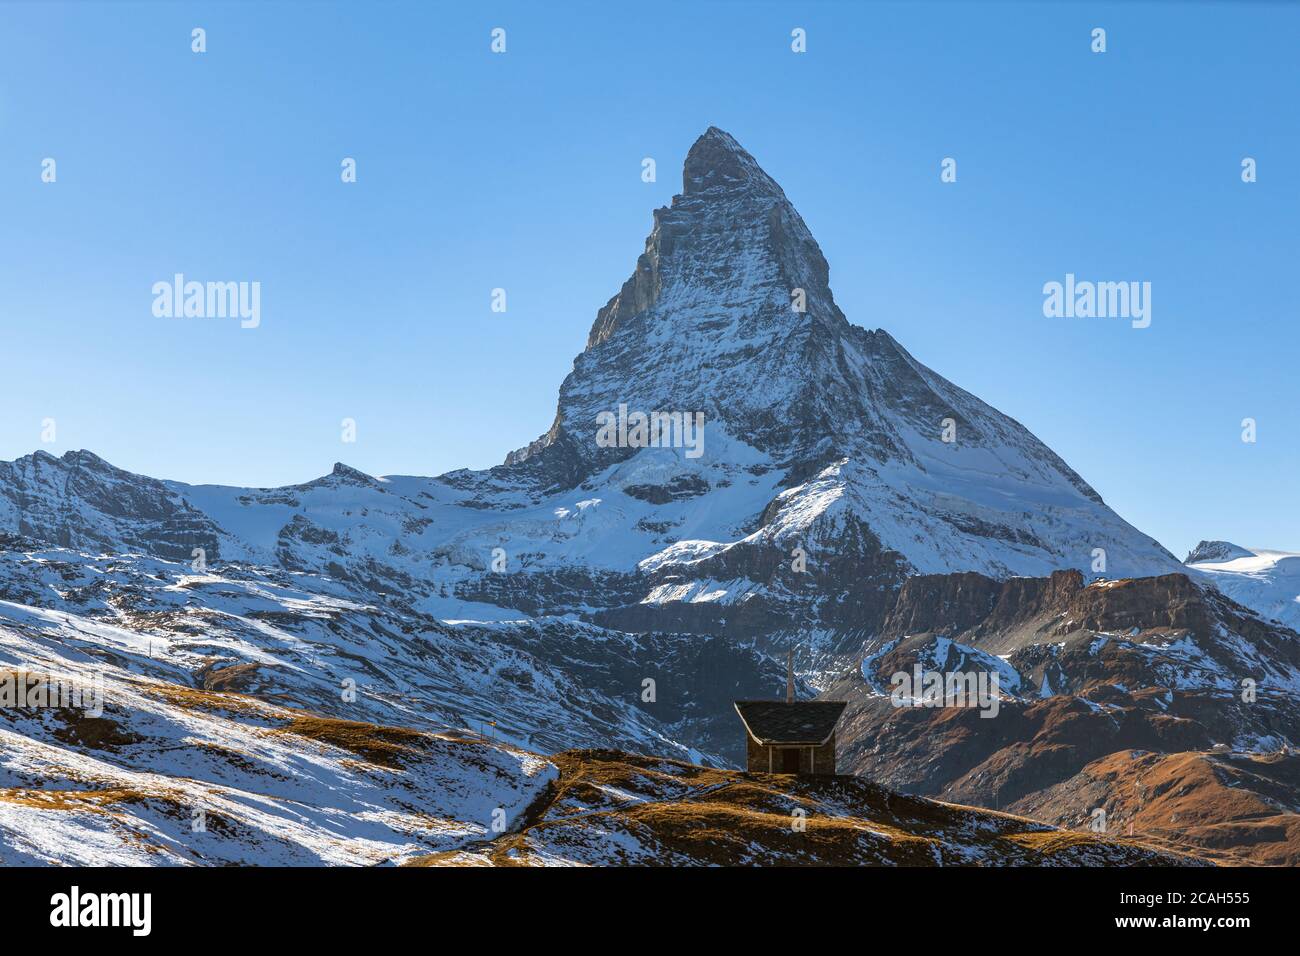 Stunning panorama view of the famous Matterhorn peak of Swiss Alps on sunny autumn day with snow and blue sky, from the train staion Riffelberg with c Stock Photo